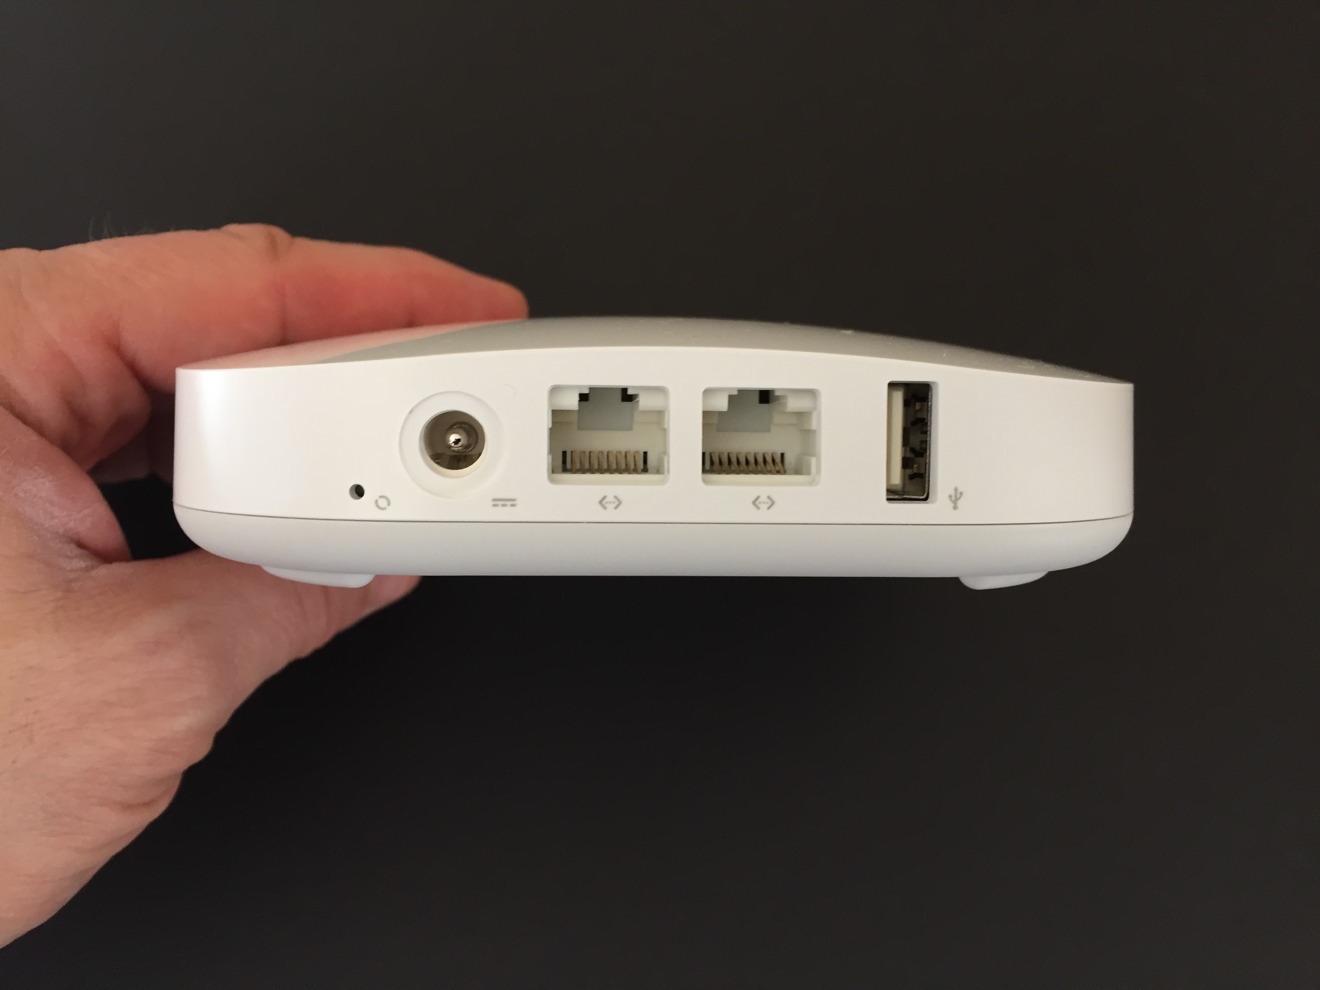 A simple two-port switch, and USB you can't use. 